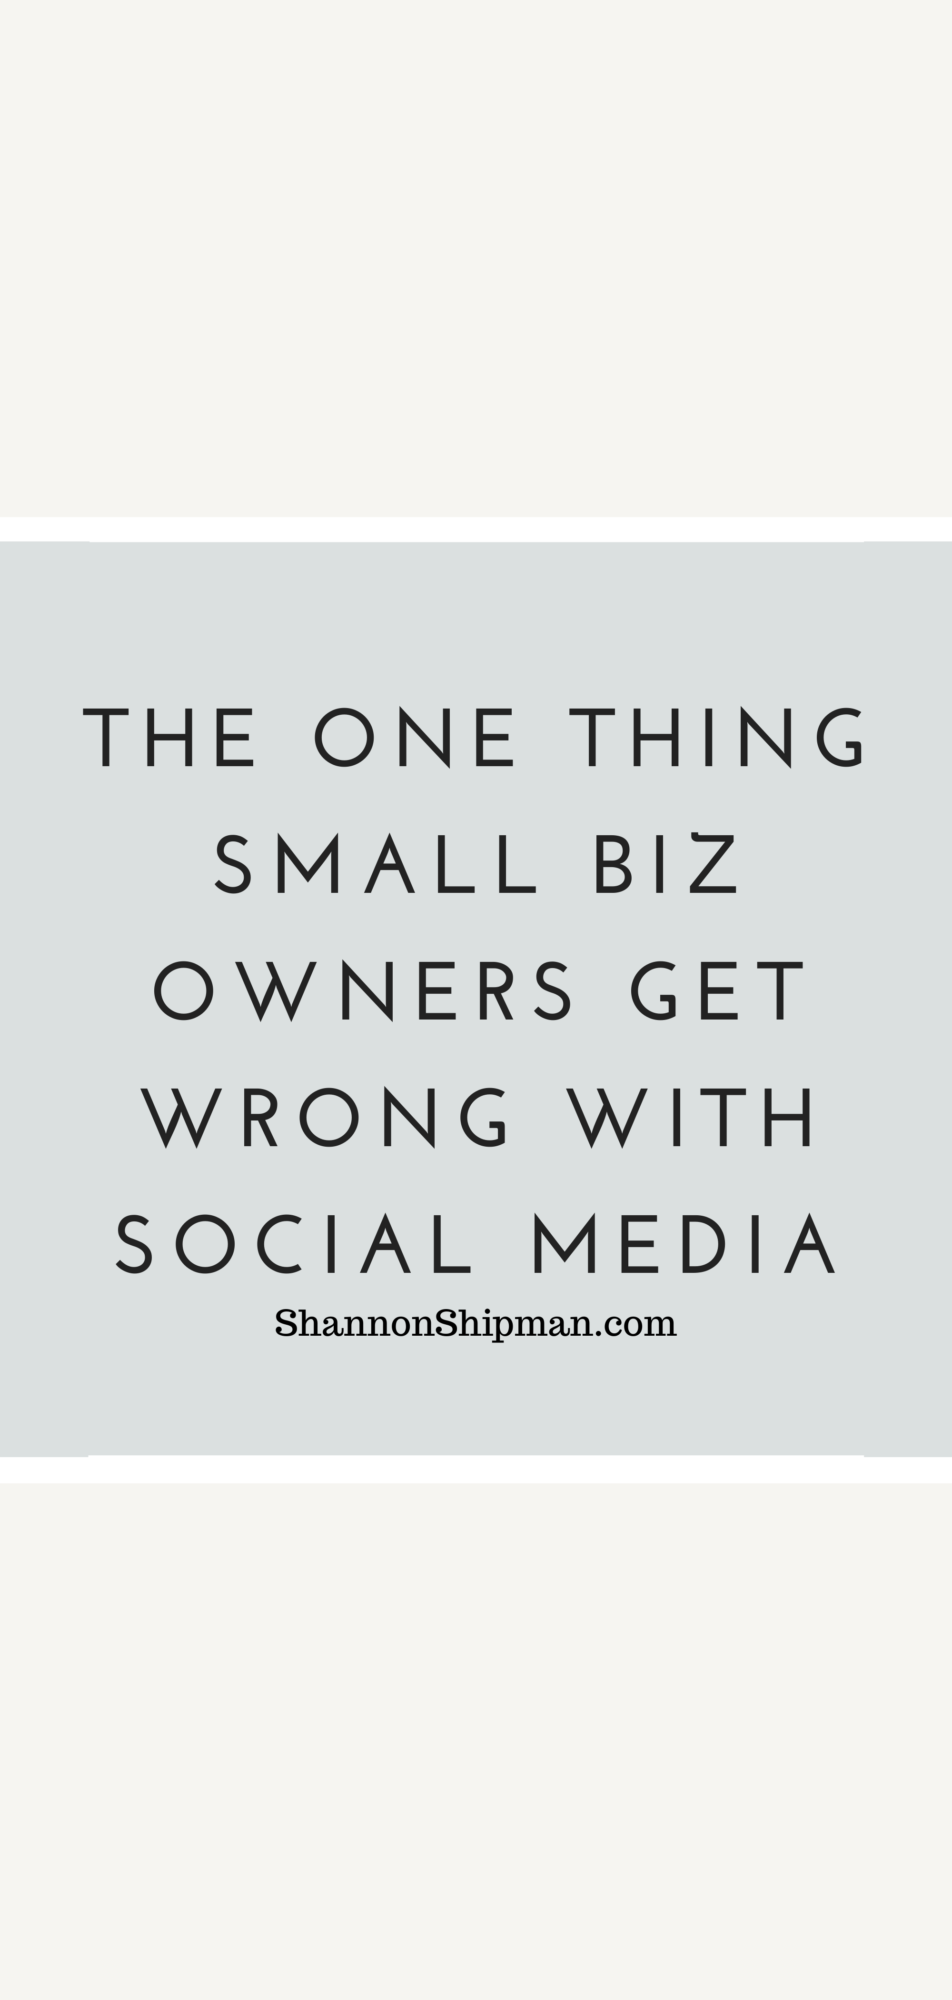 small business owners on social media | Social Media Tips by popular New England lifestyle blogger, Shannon Shipman: Pinterest image of the one thing small business owners get wrong with social media. 